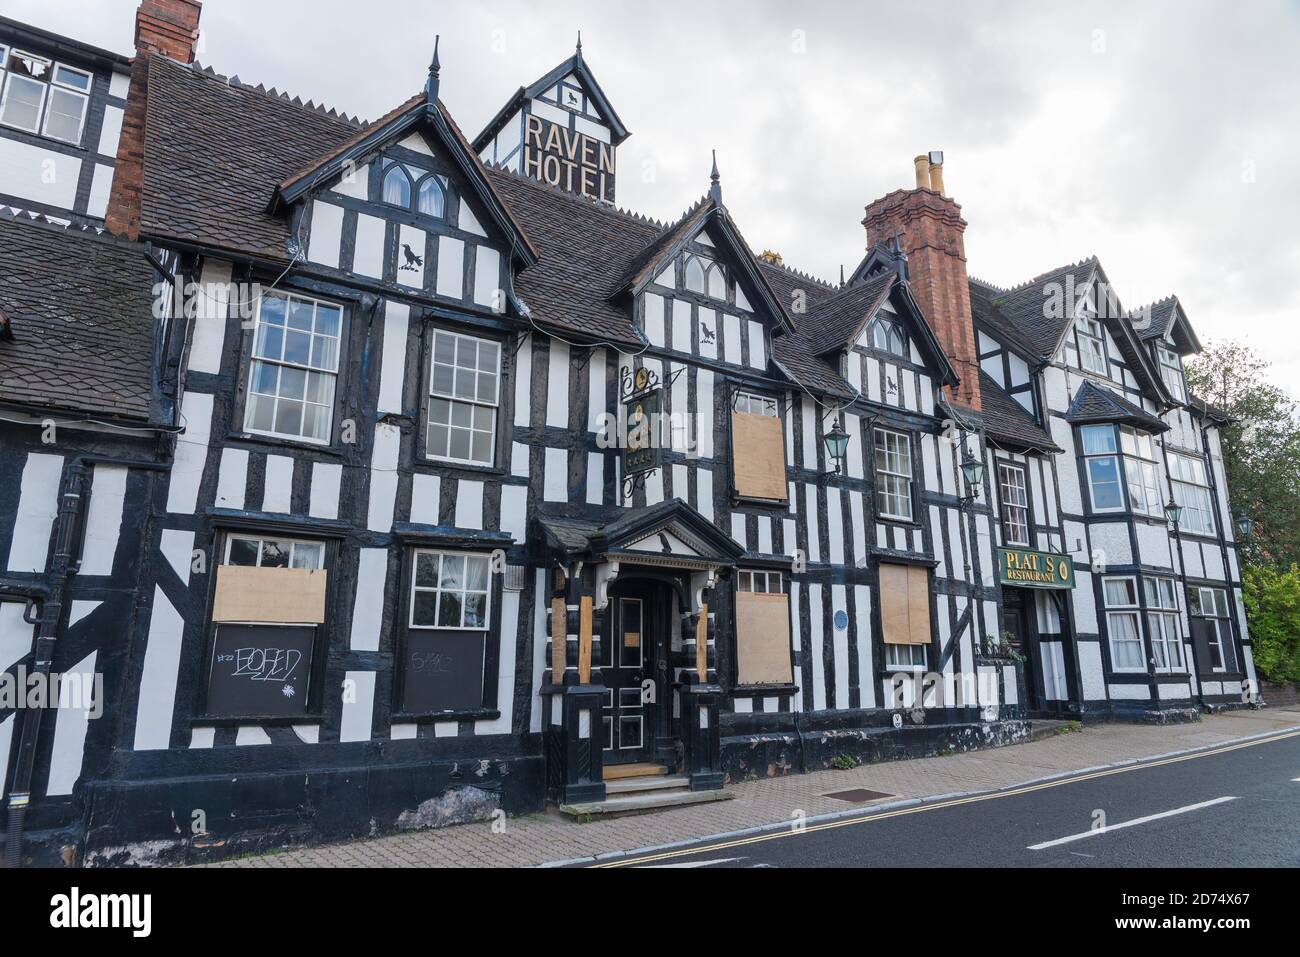 The boarded-up closed down Raven Hotel in Droitwich Spa,Worcestershire is a large black and white timber-framed building will be converted into homes Stock Photo